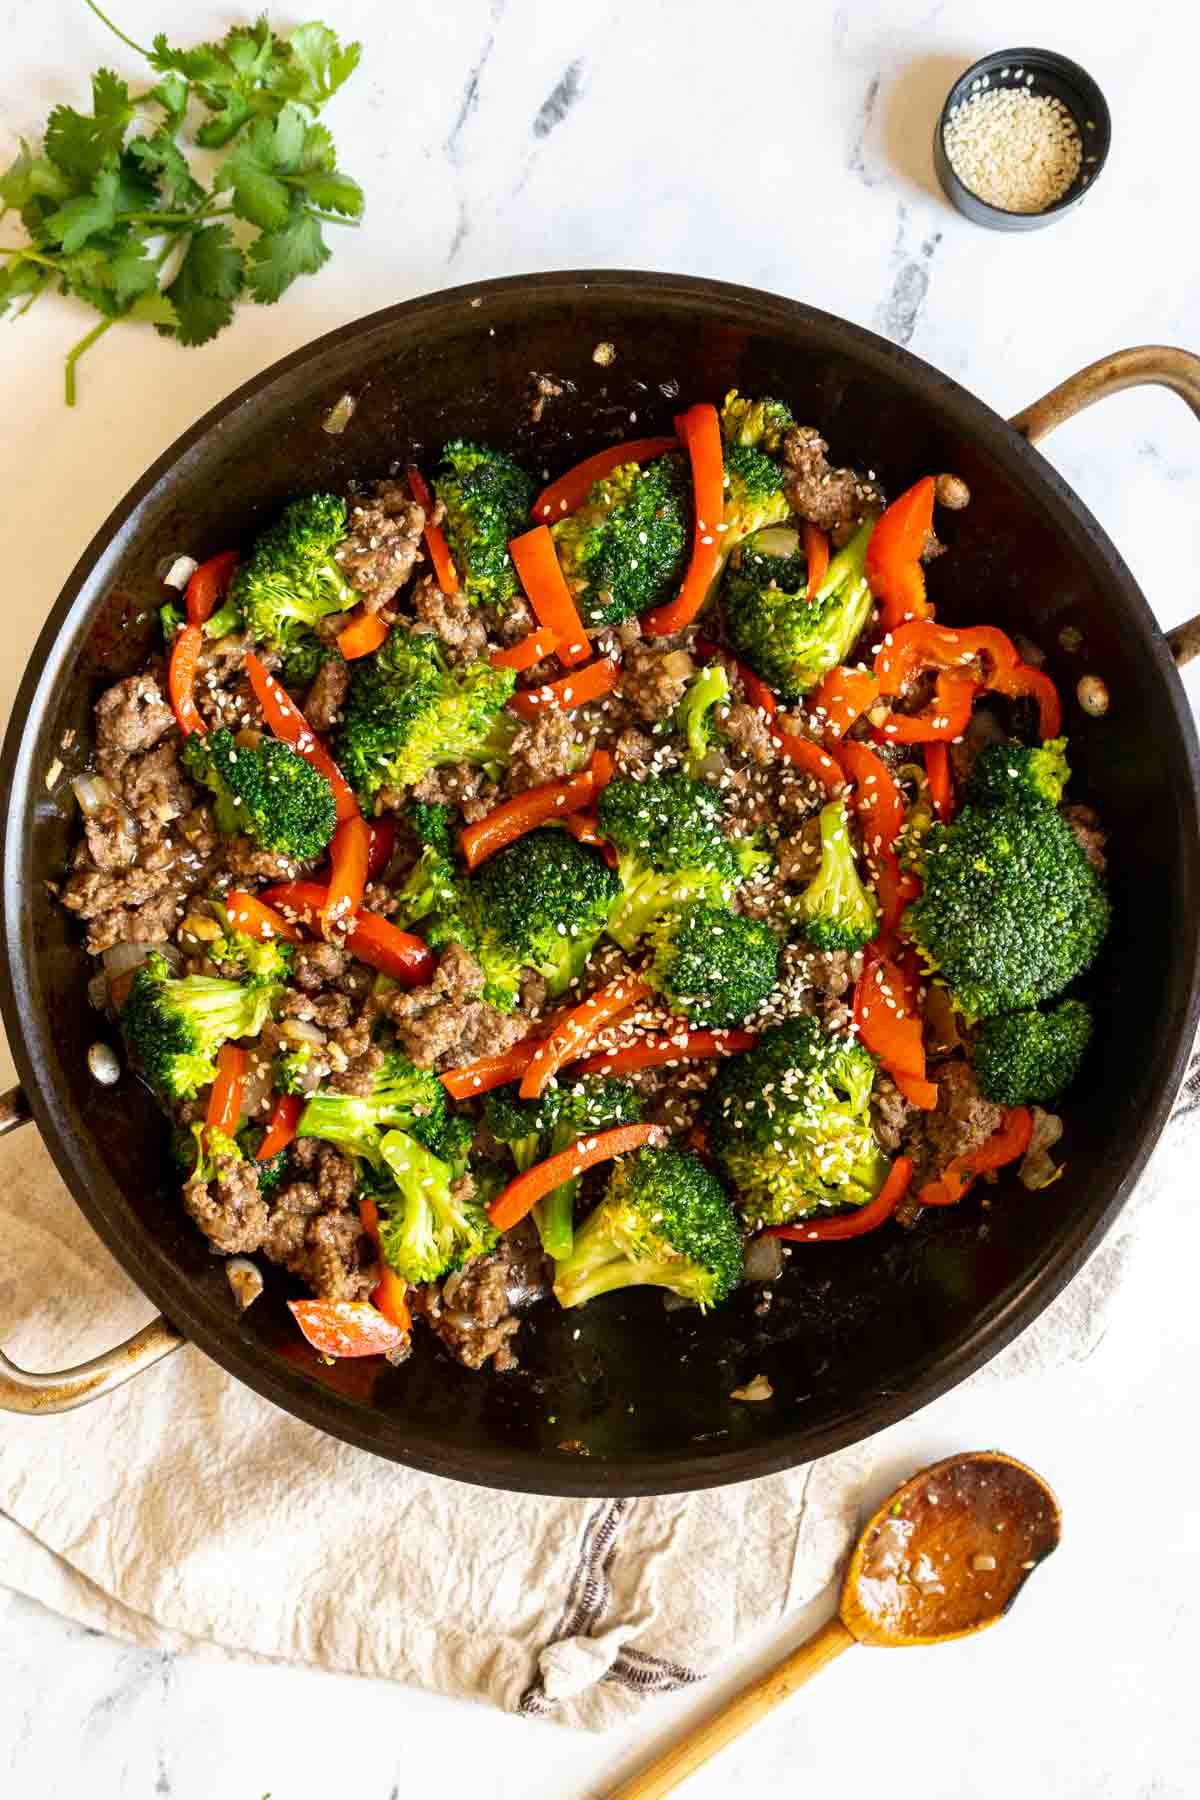 Sauteed vegetables and ground beef in a pan.